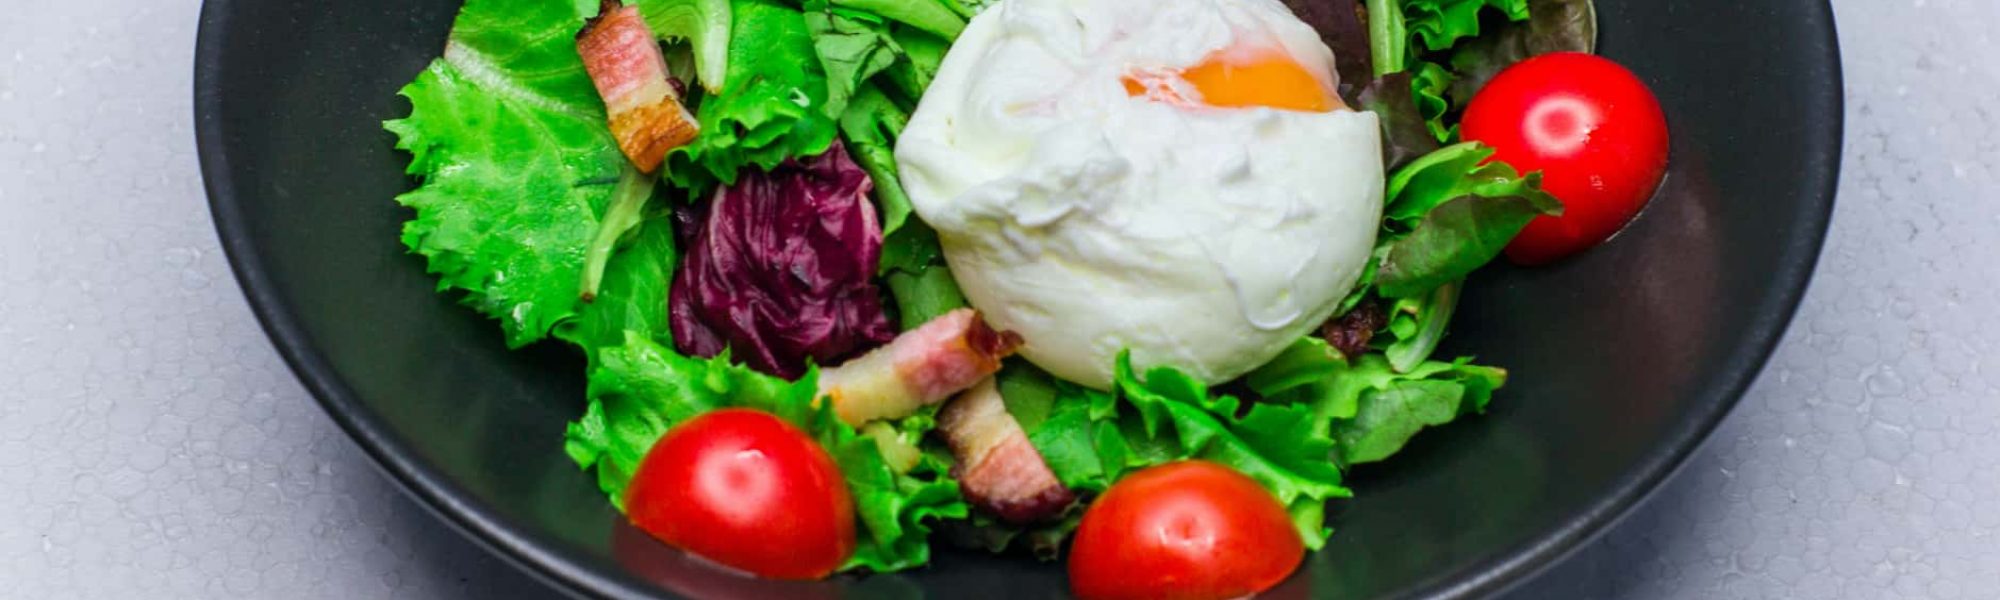 Example of bacon in a diabetic meal. Salad with bacon chunks and egg.